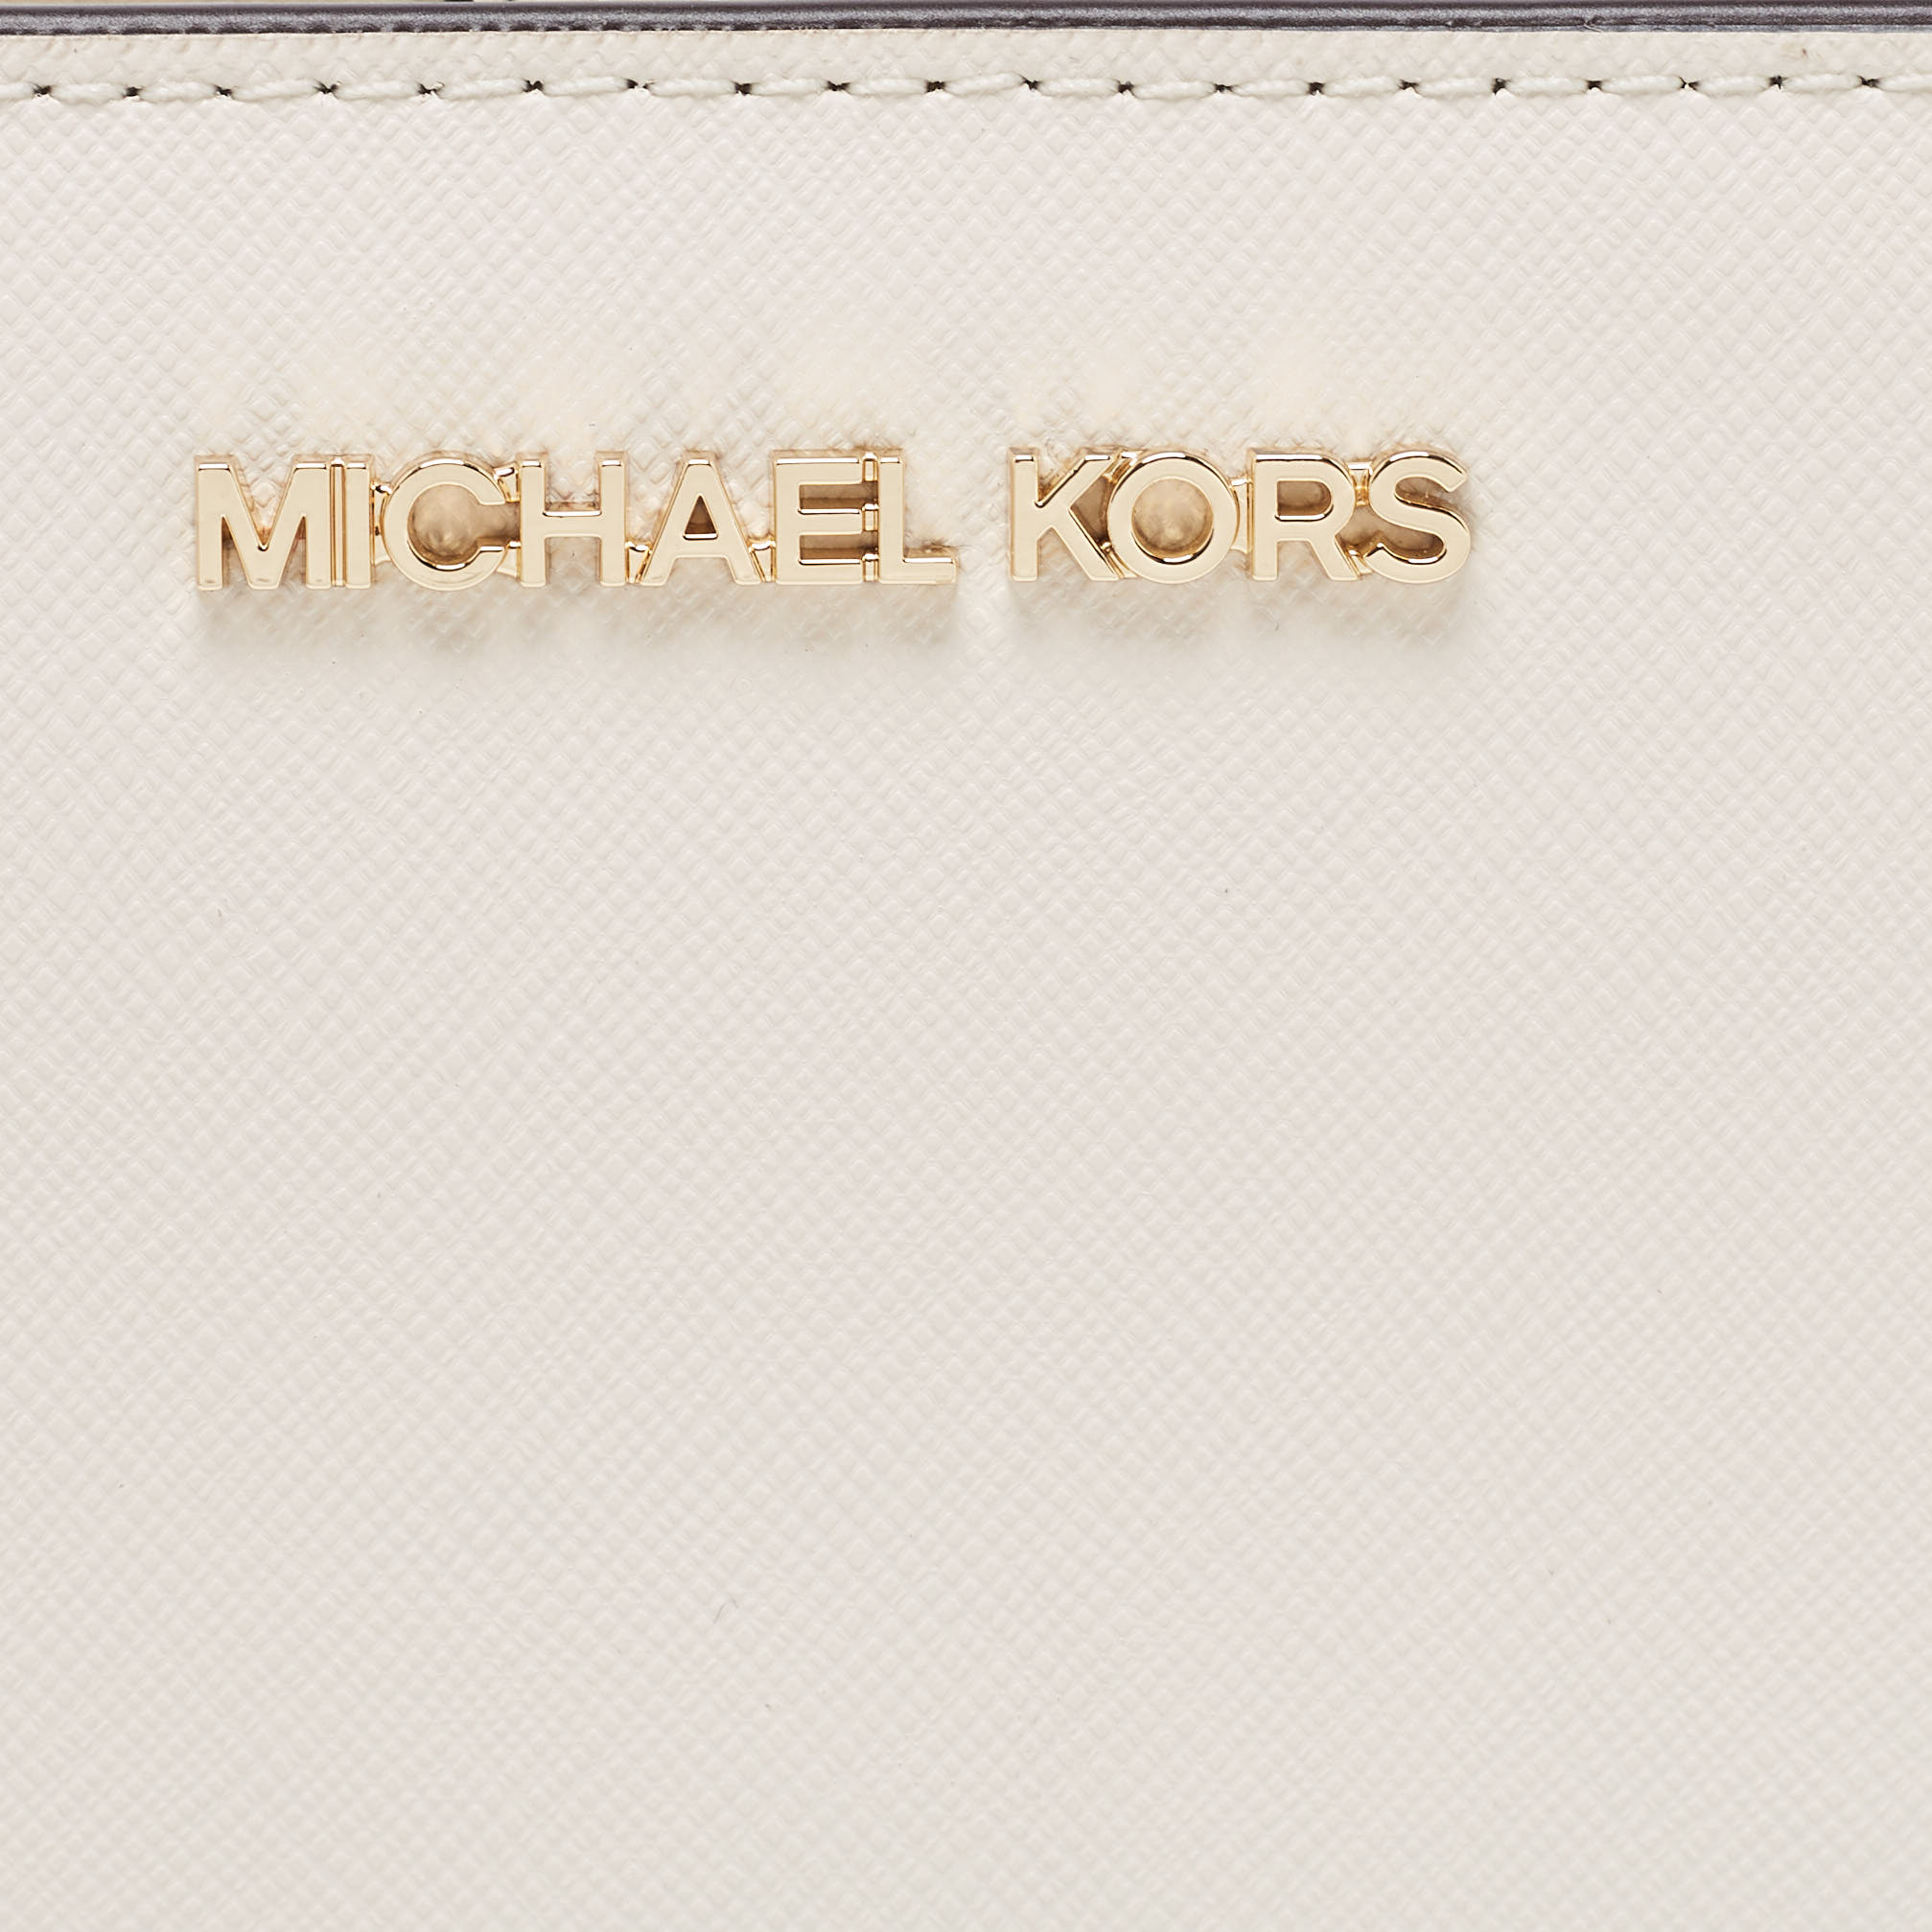 Michael Kors White Saffiano Leather Travel Jet Set French Wallet